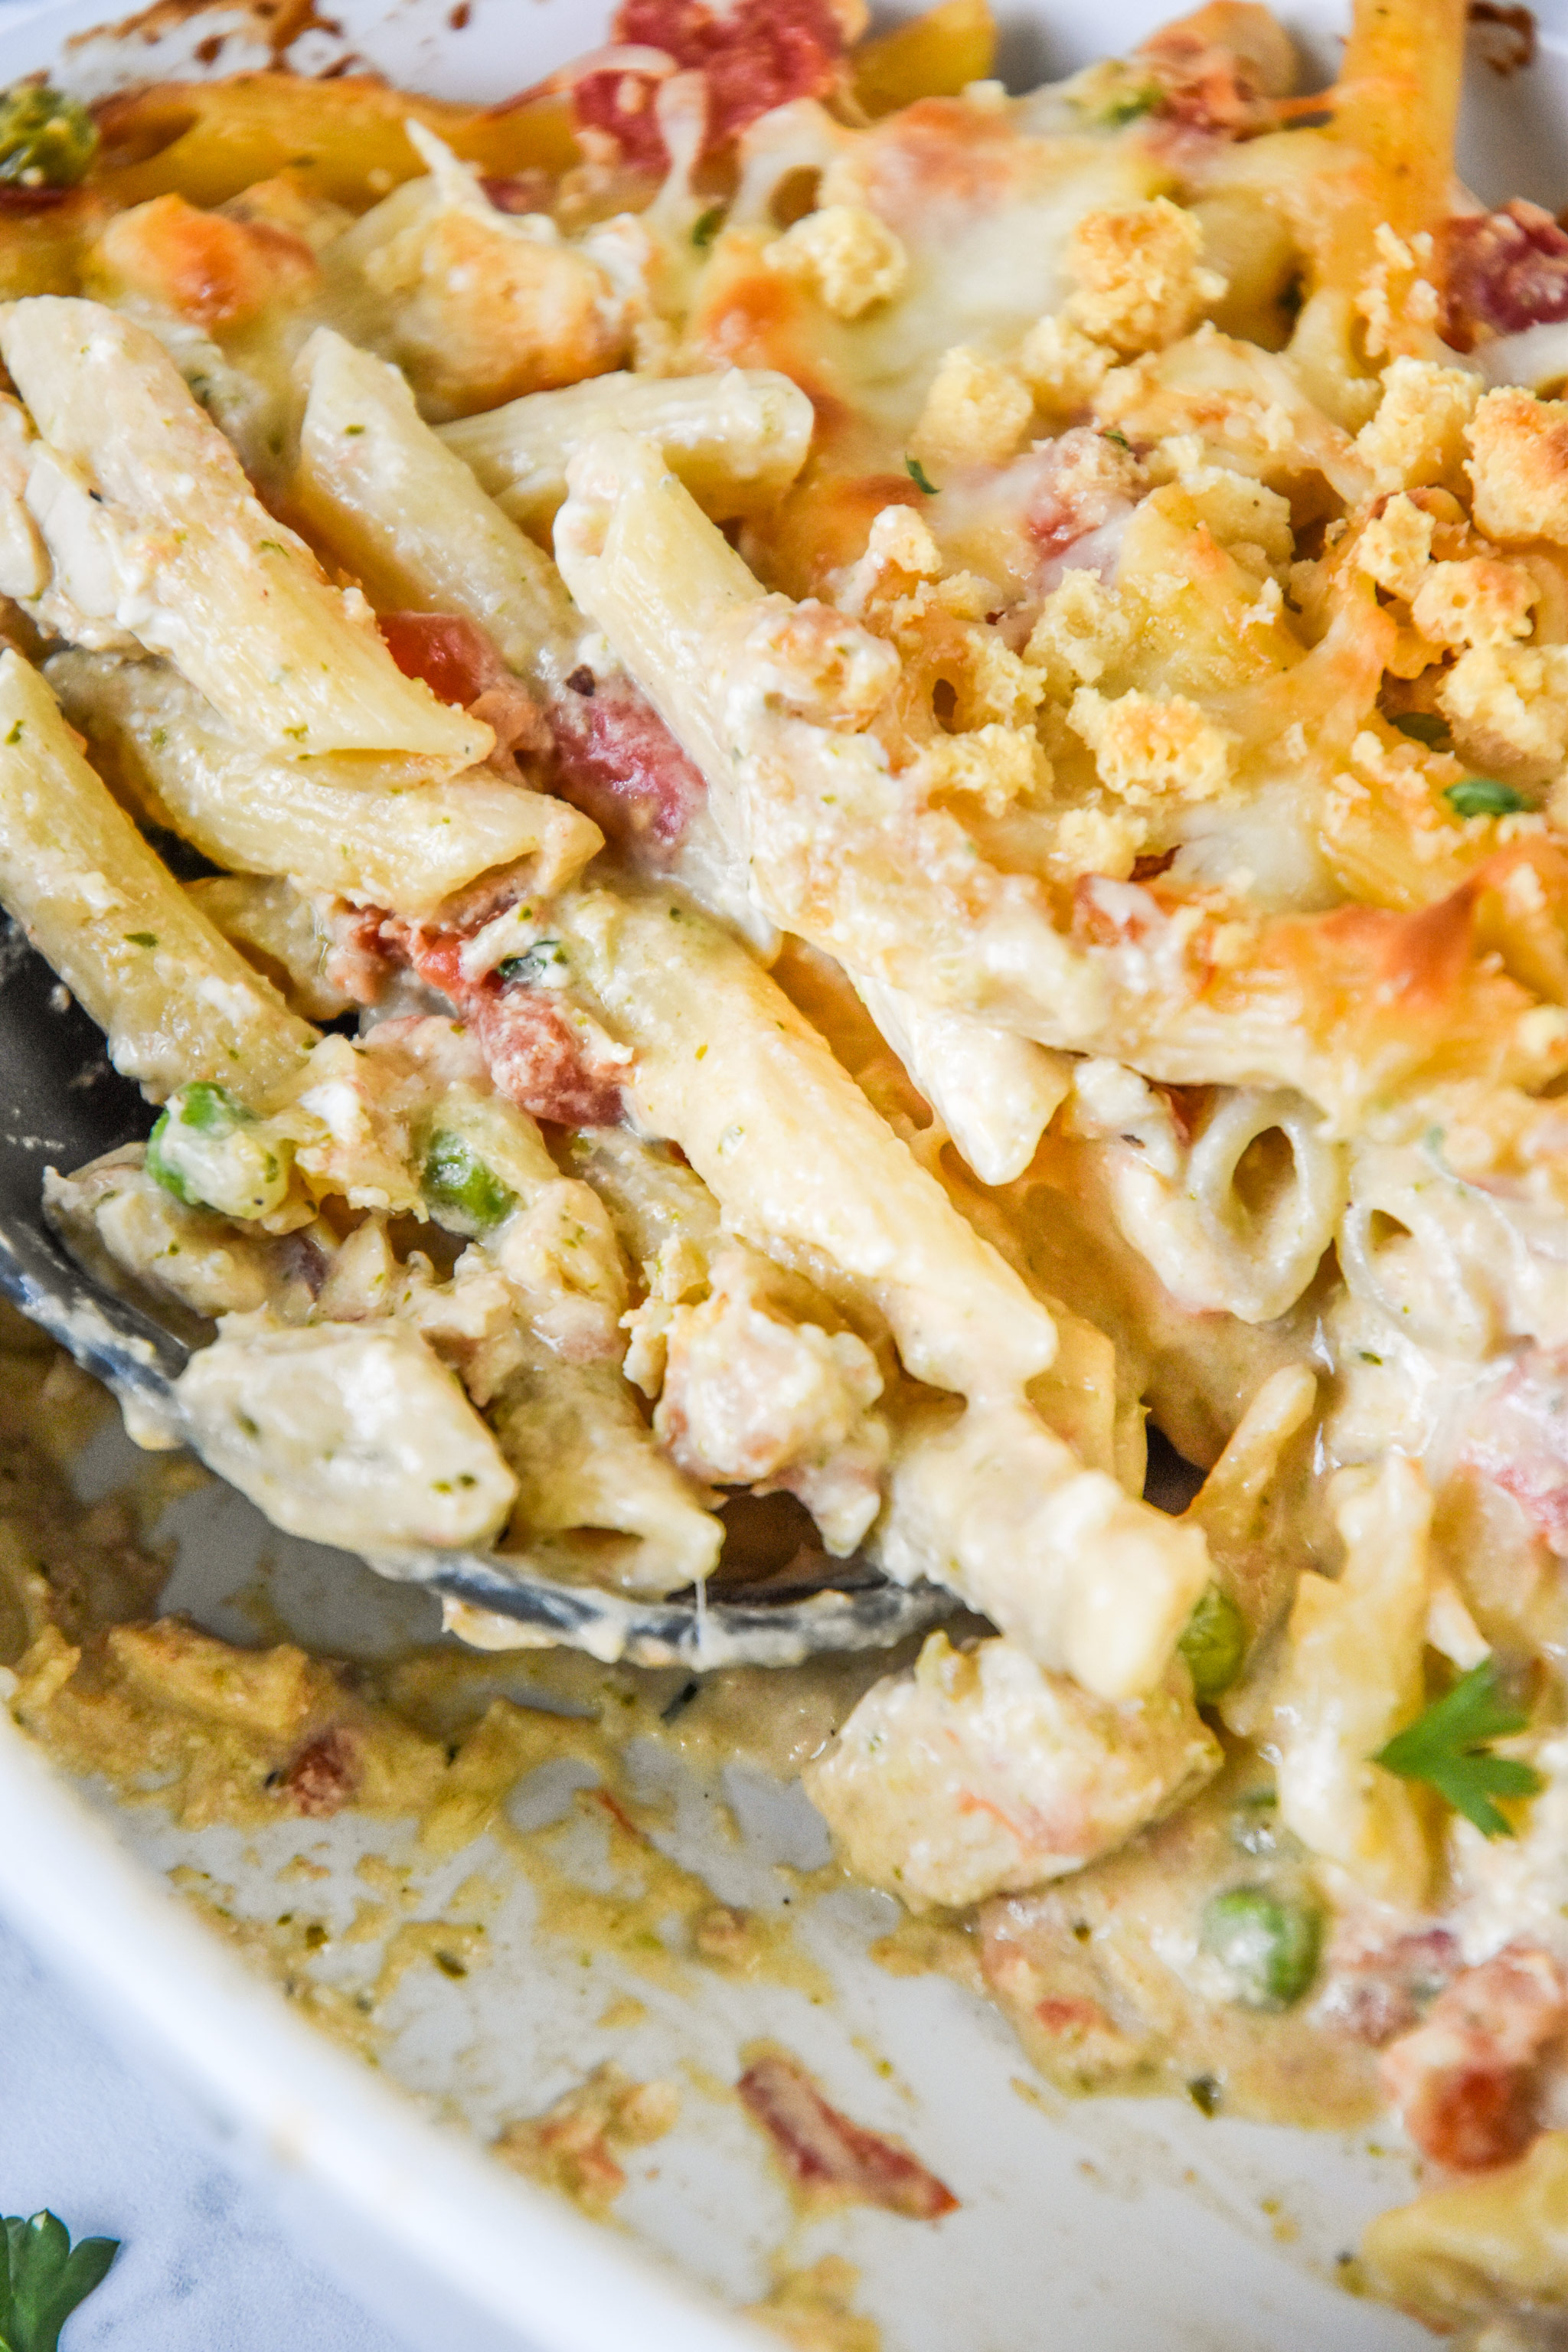 the main dish of creamy pesto pasta chicken bake after cooking.